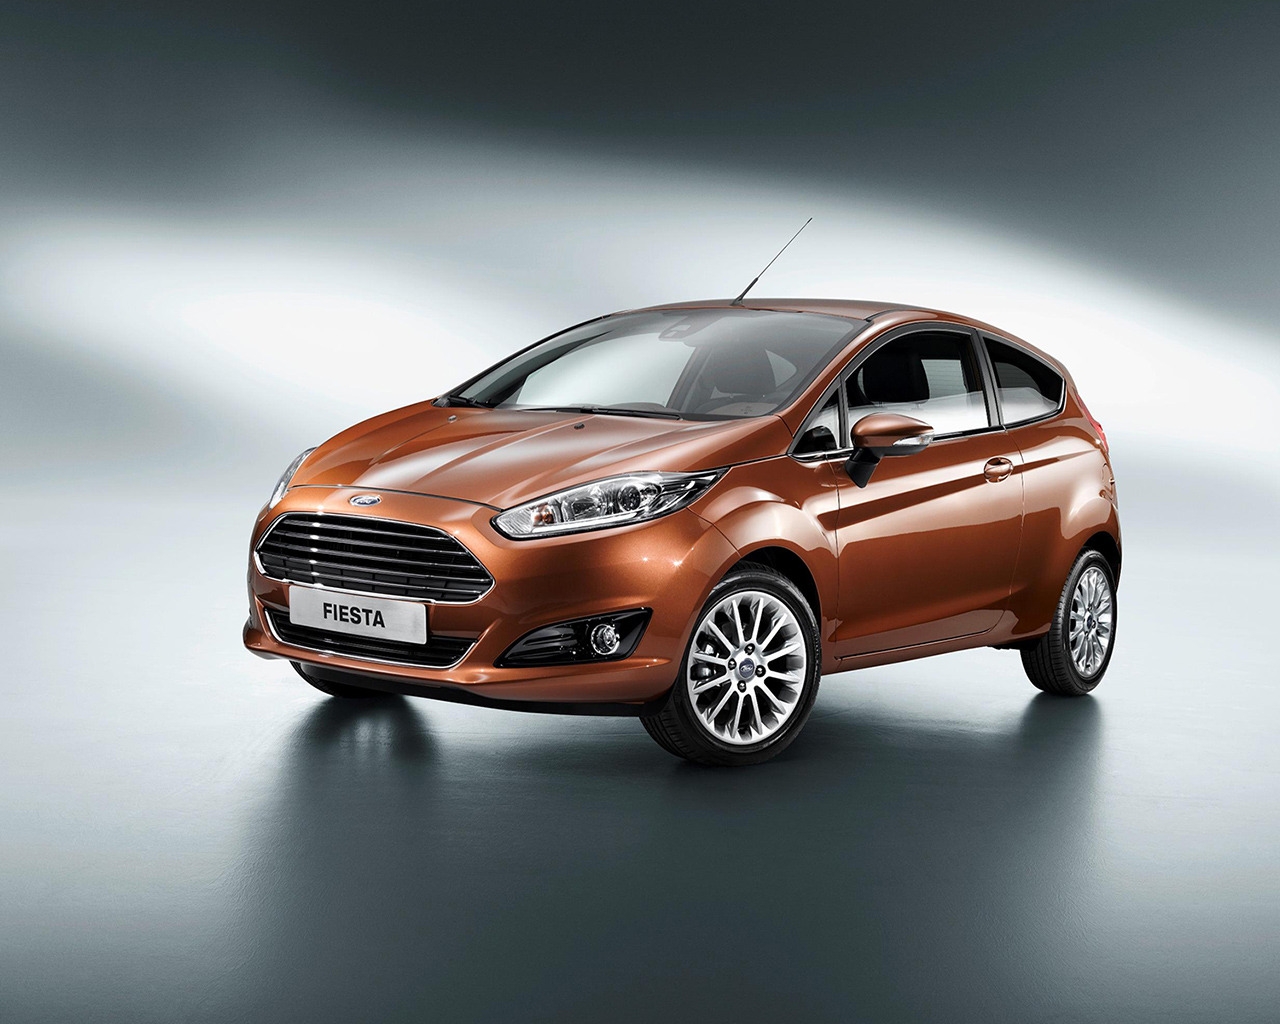 Ford Fiesta 2014 for 1280 x 1024 resolution